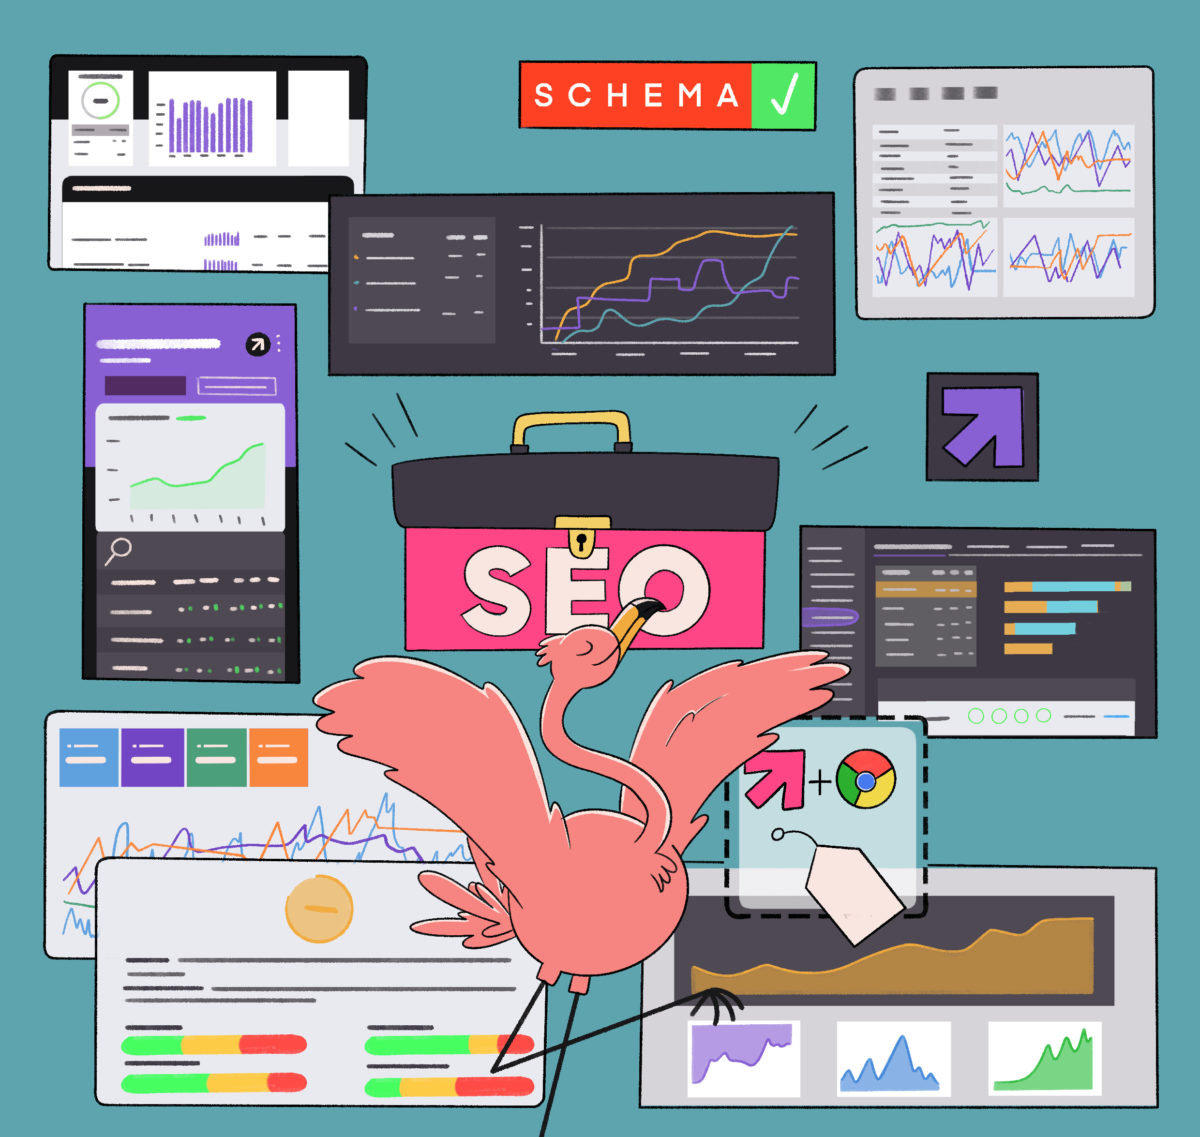 Graphic illustration of various seo and analytics tools and charts with a central metaphorical flamingo representing search optimization amidst digital marketing elements.